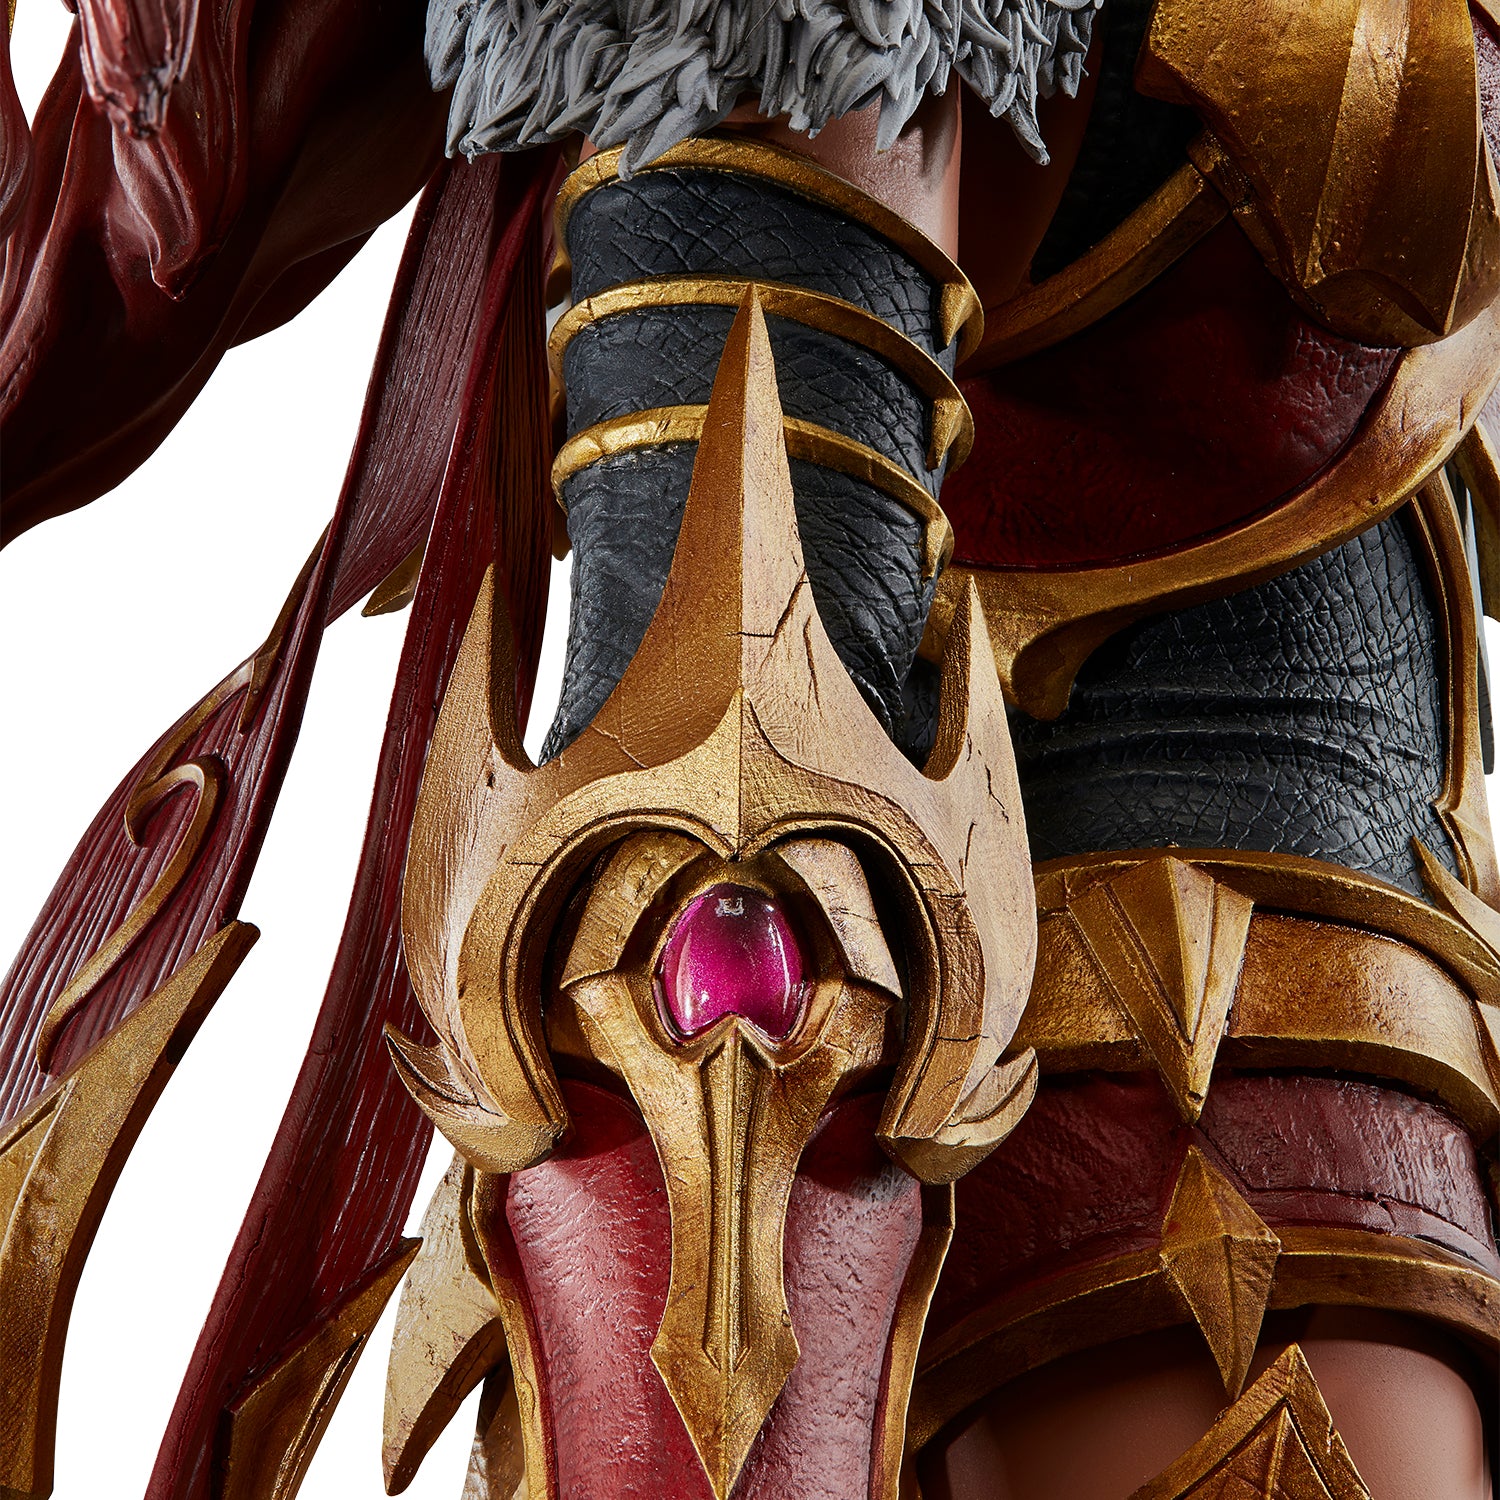 World of Warcraft Alexstrasza 20in Statue - Close Up View